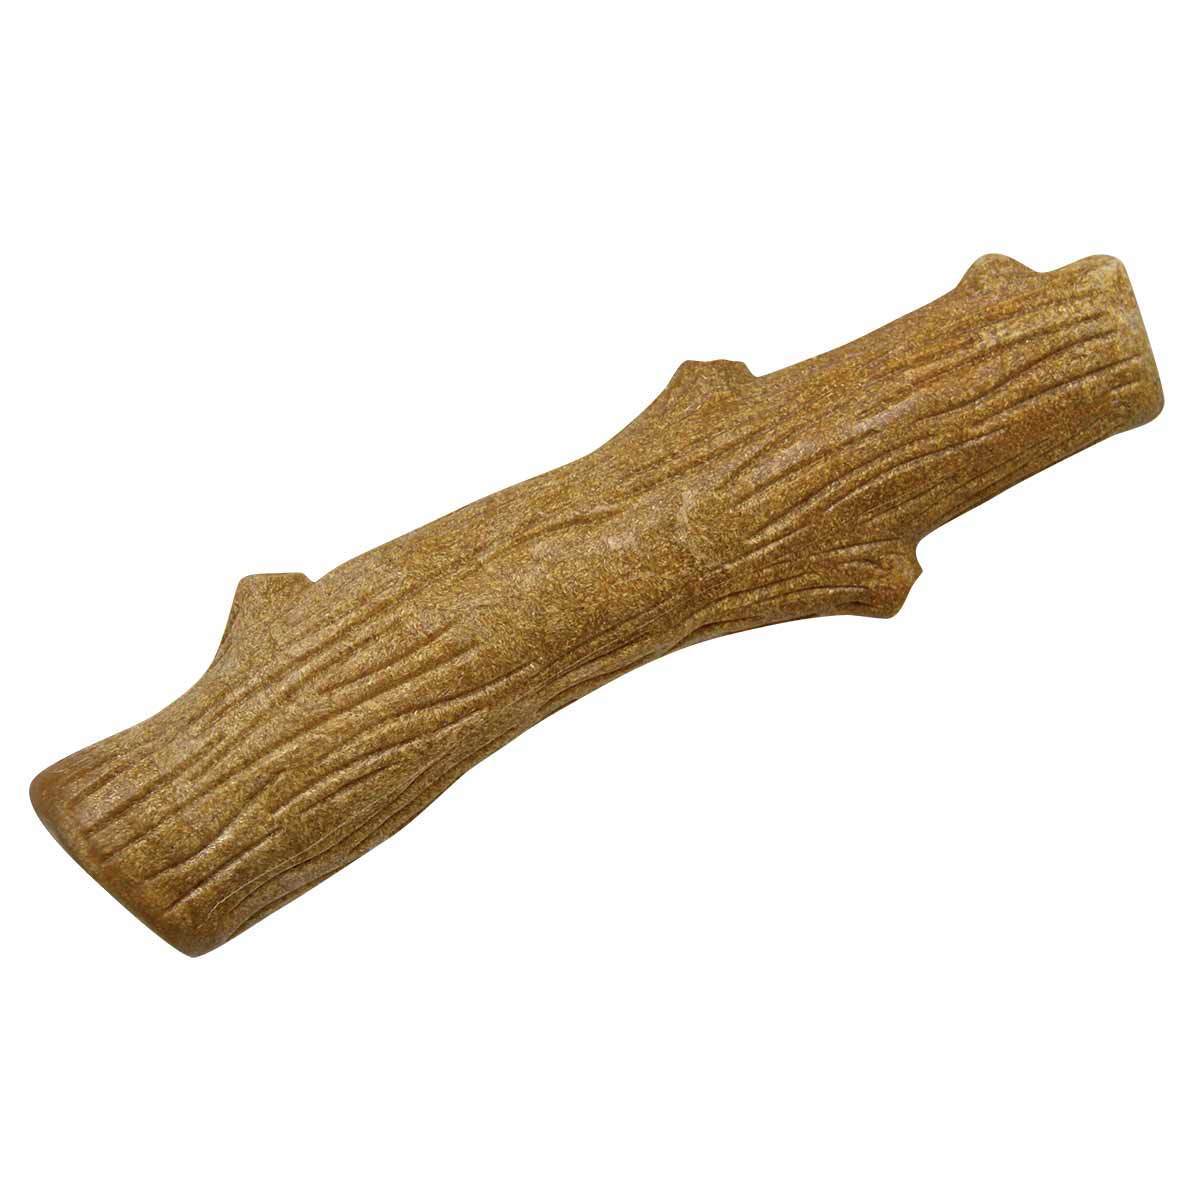 Petstages Dogwood Stick Dog Toy Large (Brown) 8" x 1.5" x 1.5"